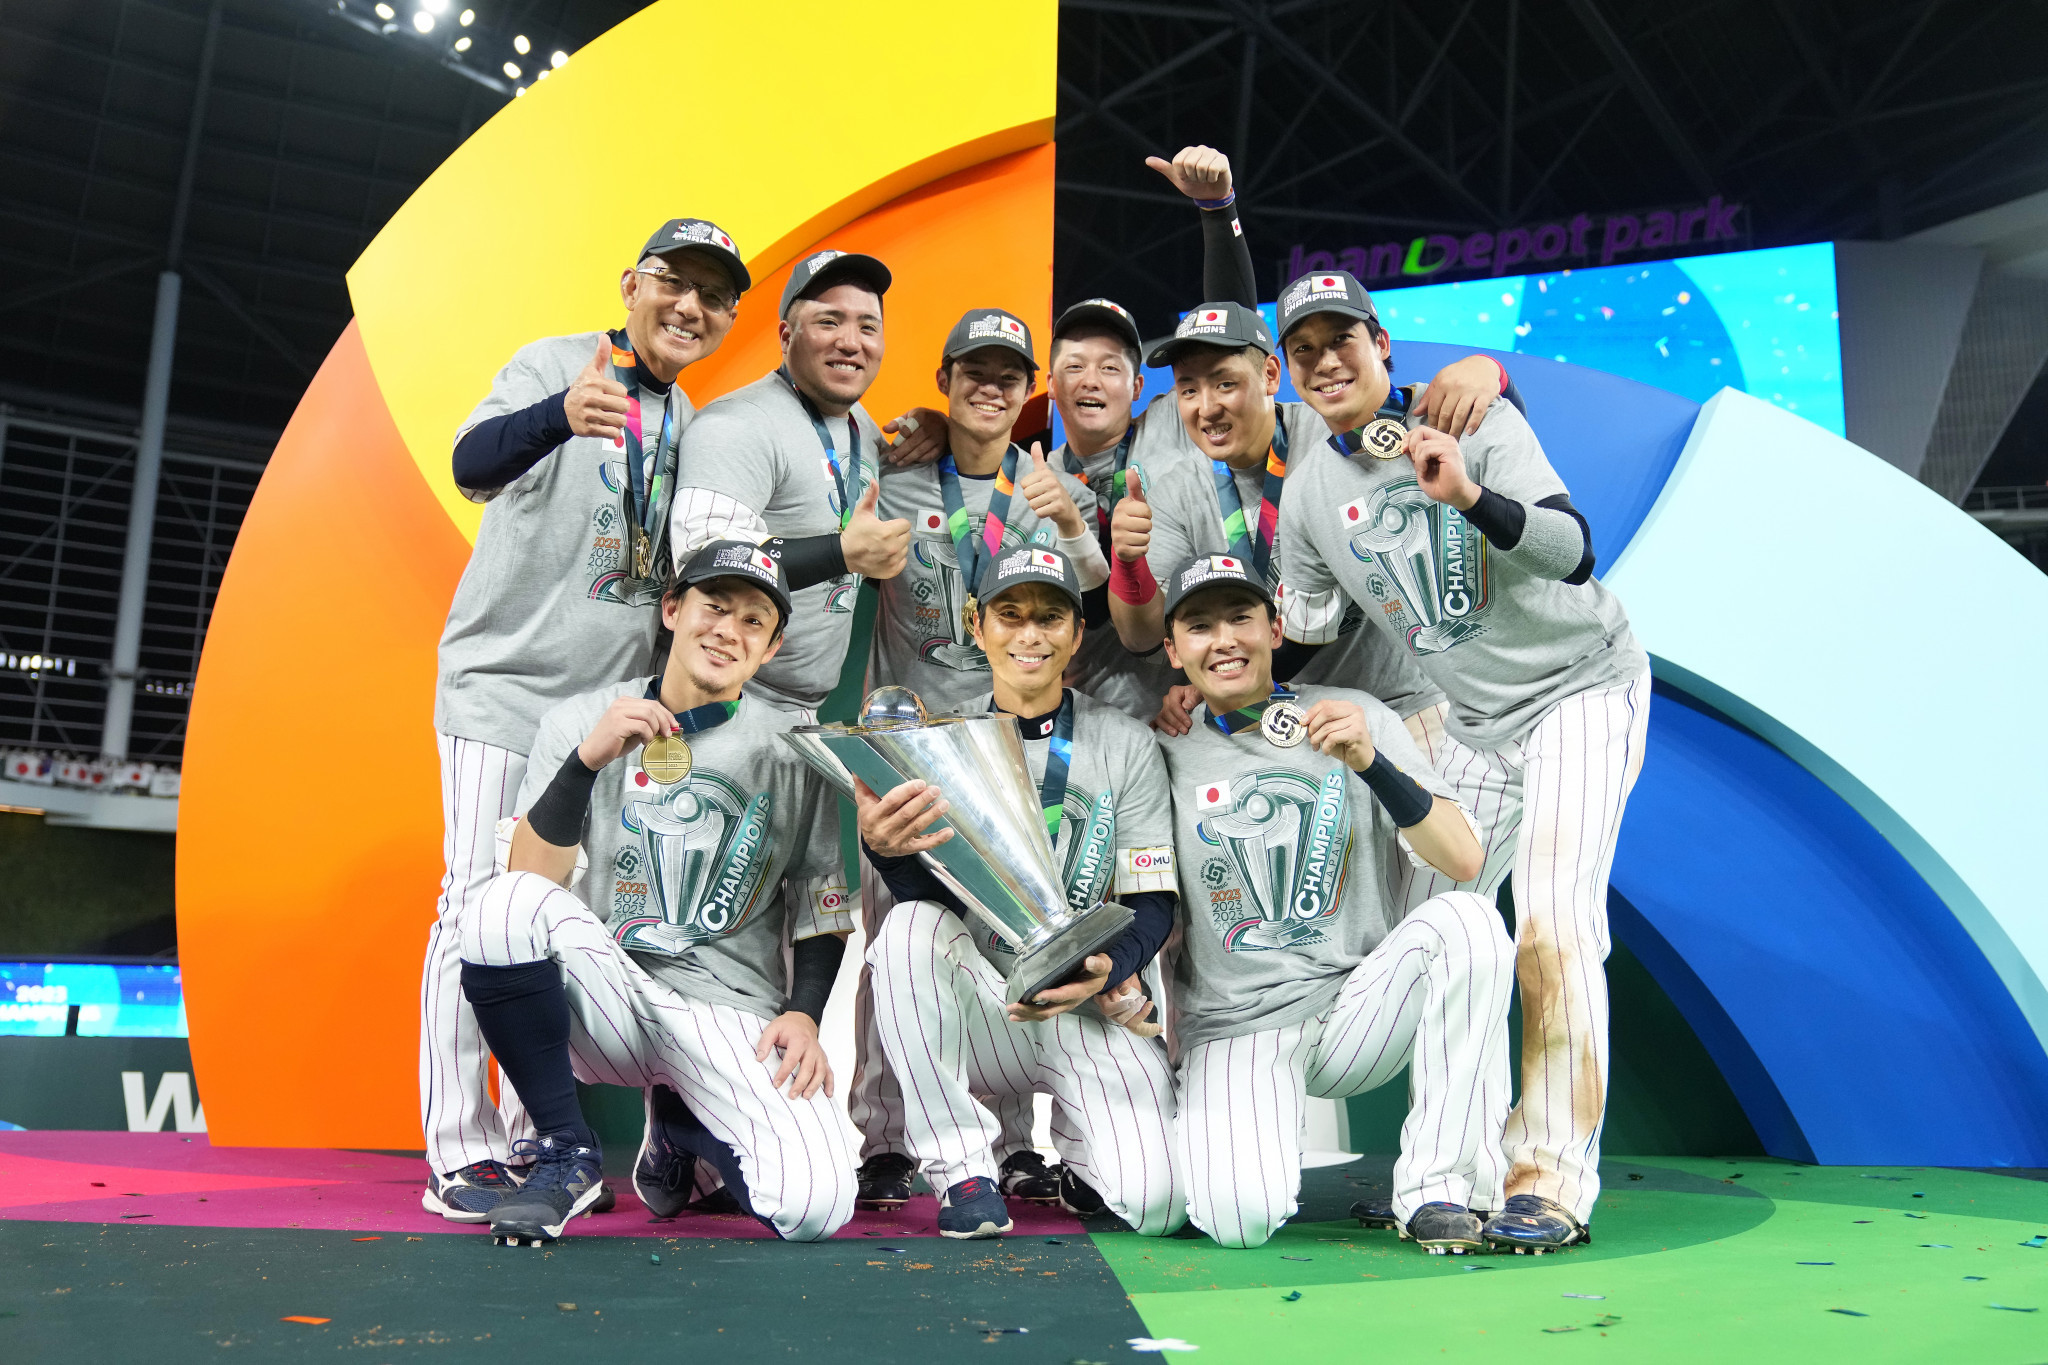 Japan's win in the World Baseball Classic extended their lead in the WBSC men's baseball world rankings ©WBSC